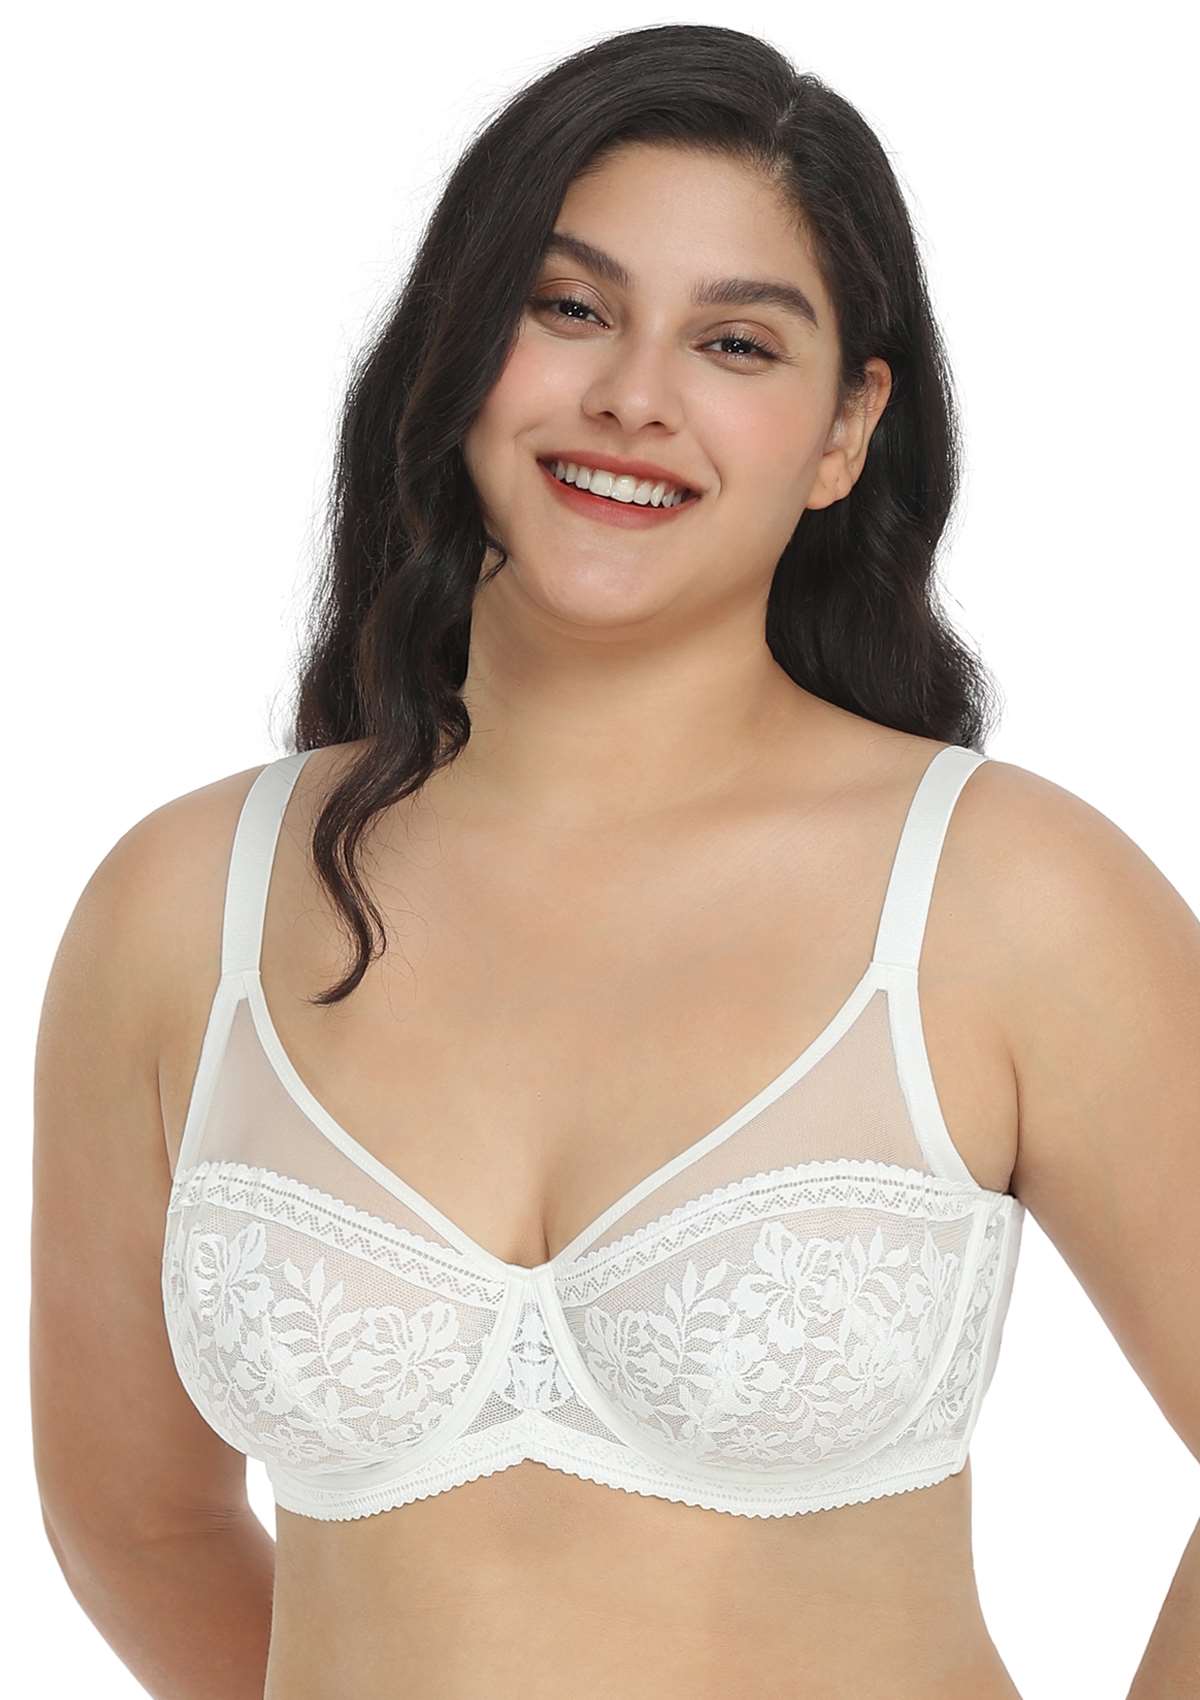 HSIA Gladioli Lace Mesh Minimizing Unlined Underwire Bra For Fuller Busts - White / 40 / DDD/F